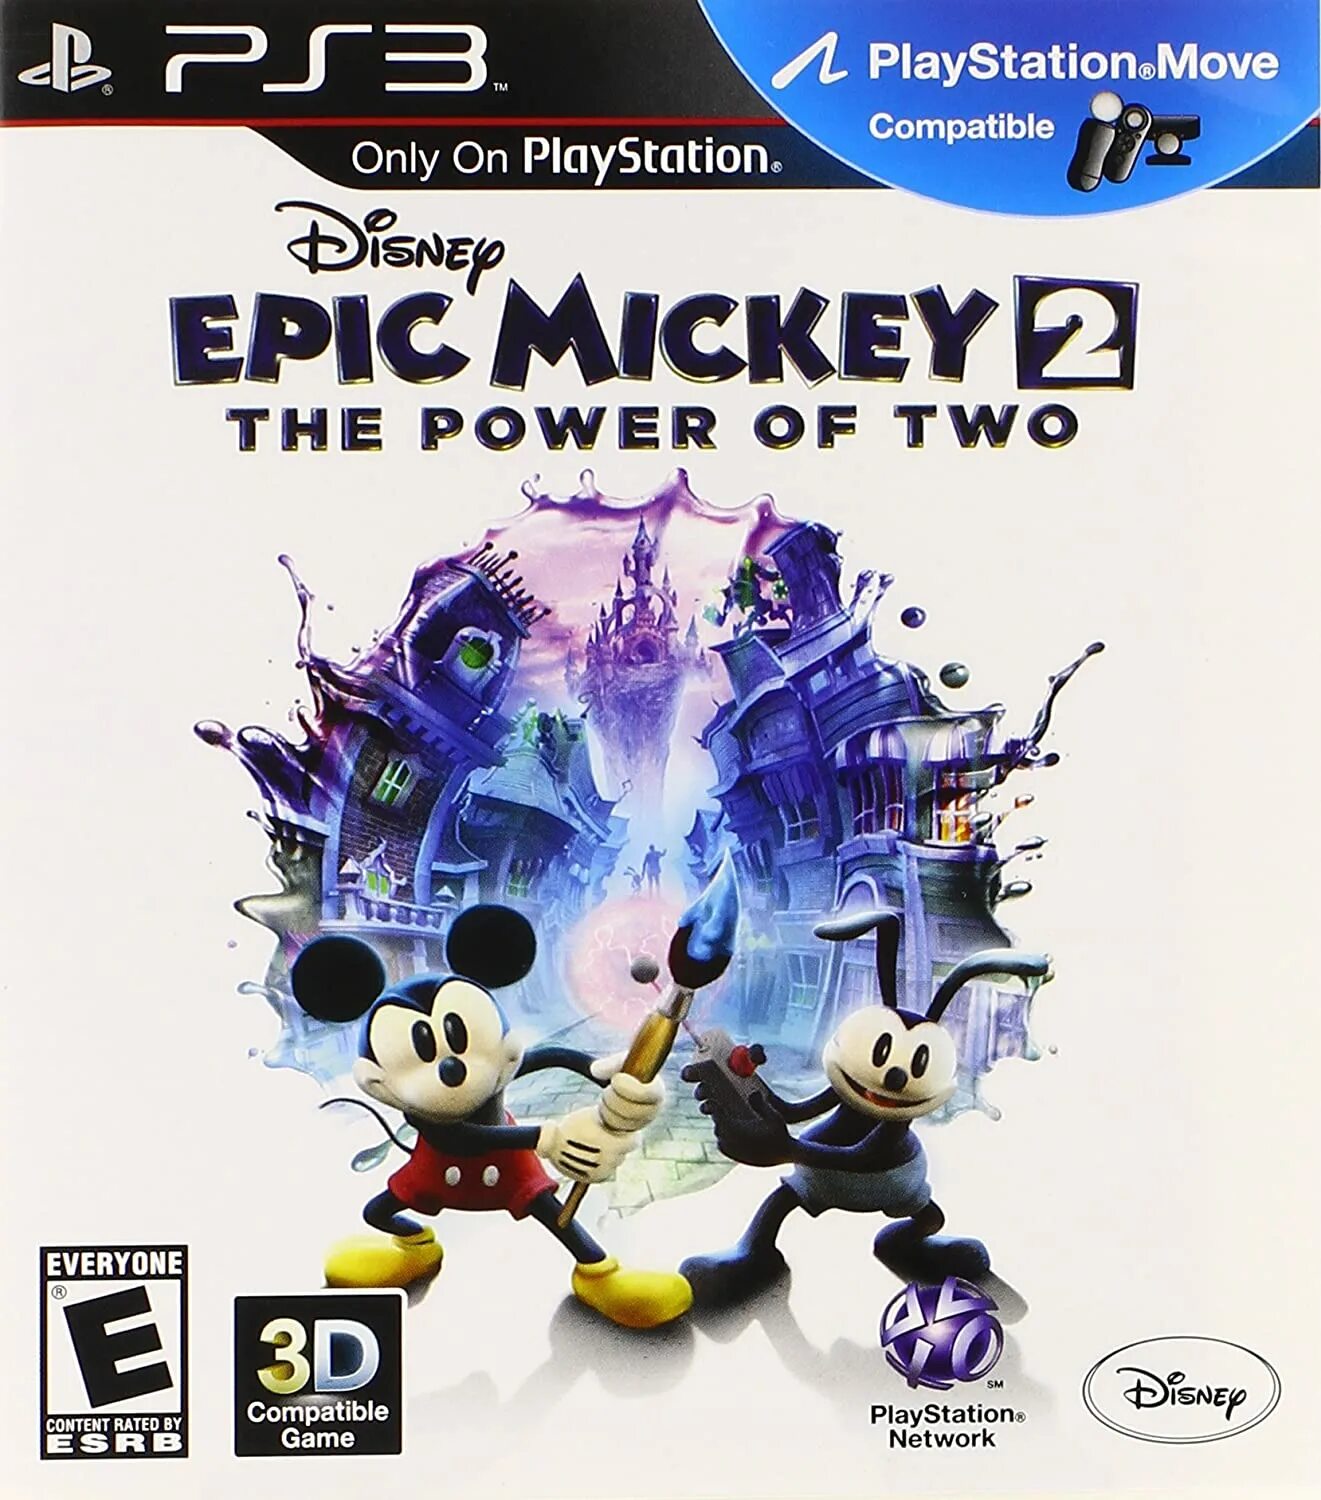 Epic Mickey 2 the Power of two ps3 обложка. Disney Epic Mickey 2 ps3. Disney Epic Mickey ПС 3. Игра Disney Epic Mickey.